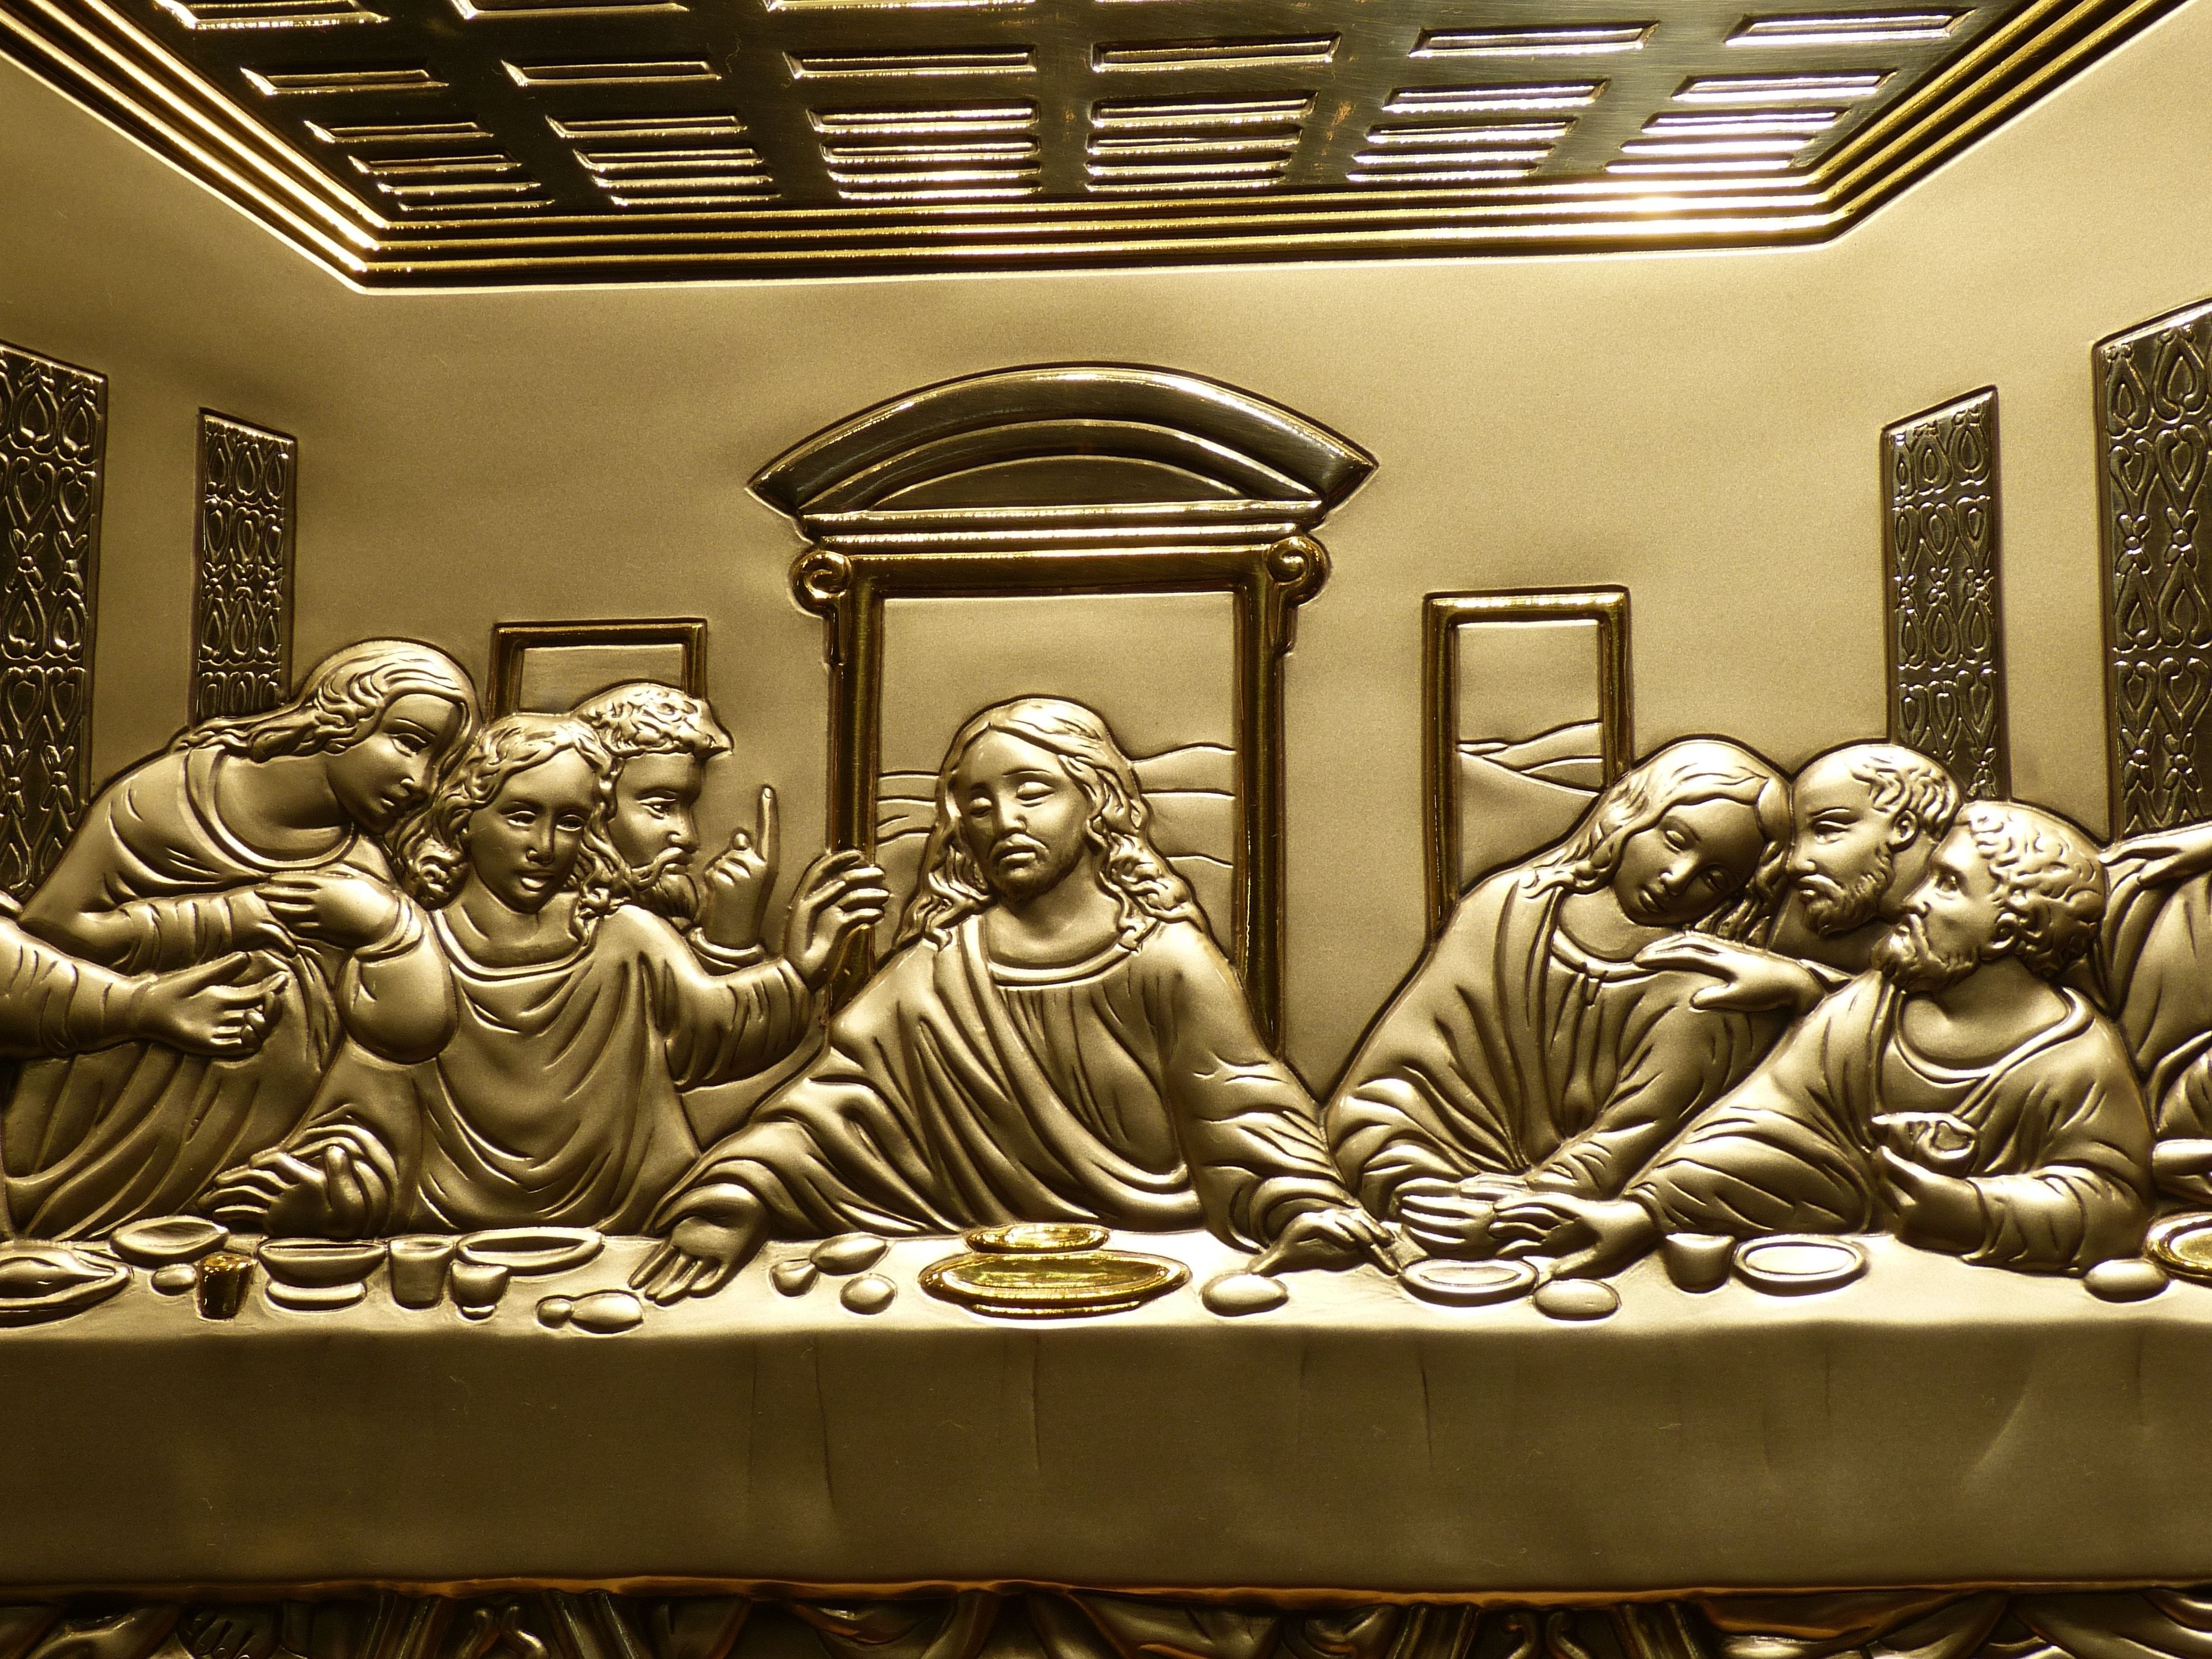 Peakpx In Most Current The Last Supper Wall Art (View 11 of 15)